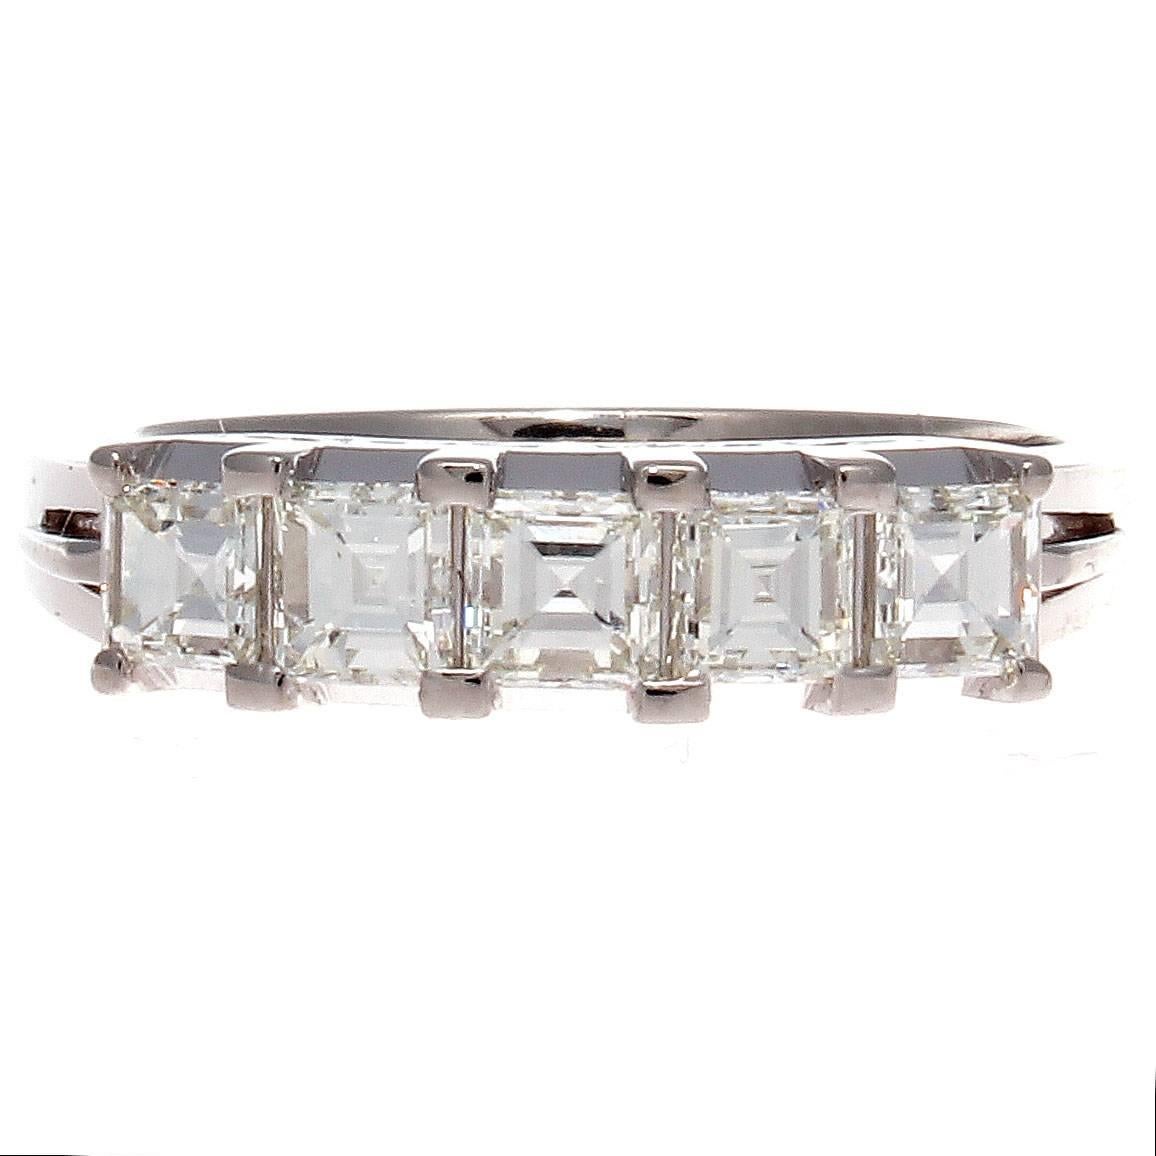 Timeless and elegant beauty in this traditional 5 stone ring. Well matched clean white asscher cut diamonds weighing exactly 1.03 carats. H-I in color and VS+ in clarity. Crafted in platinum.

Ring size 6 and may be resized.